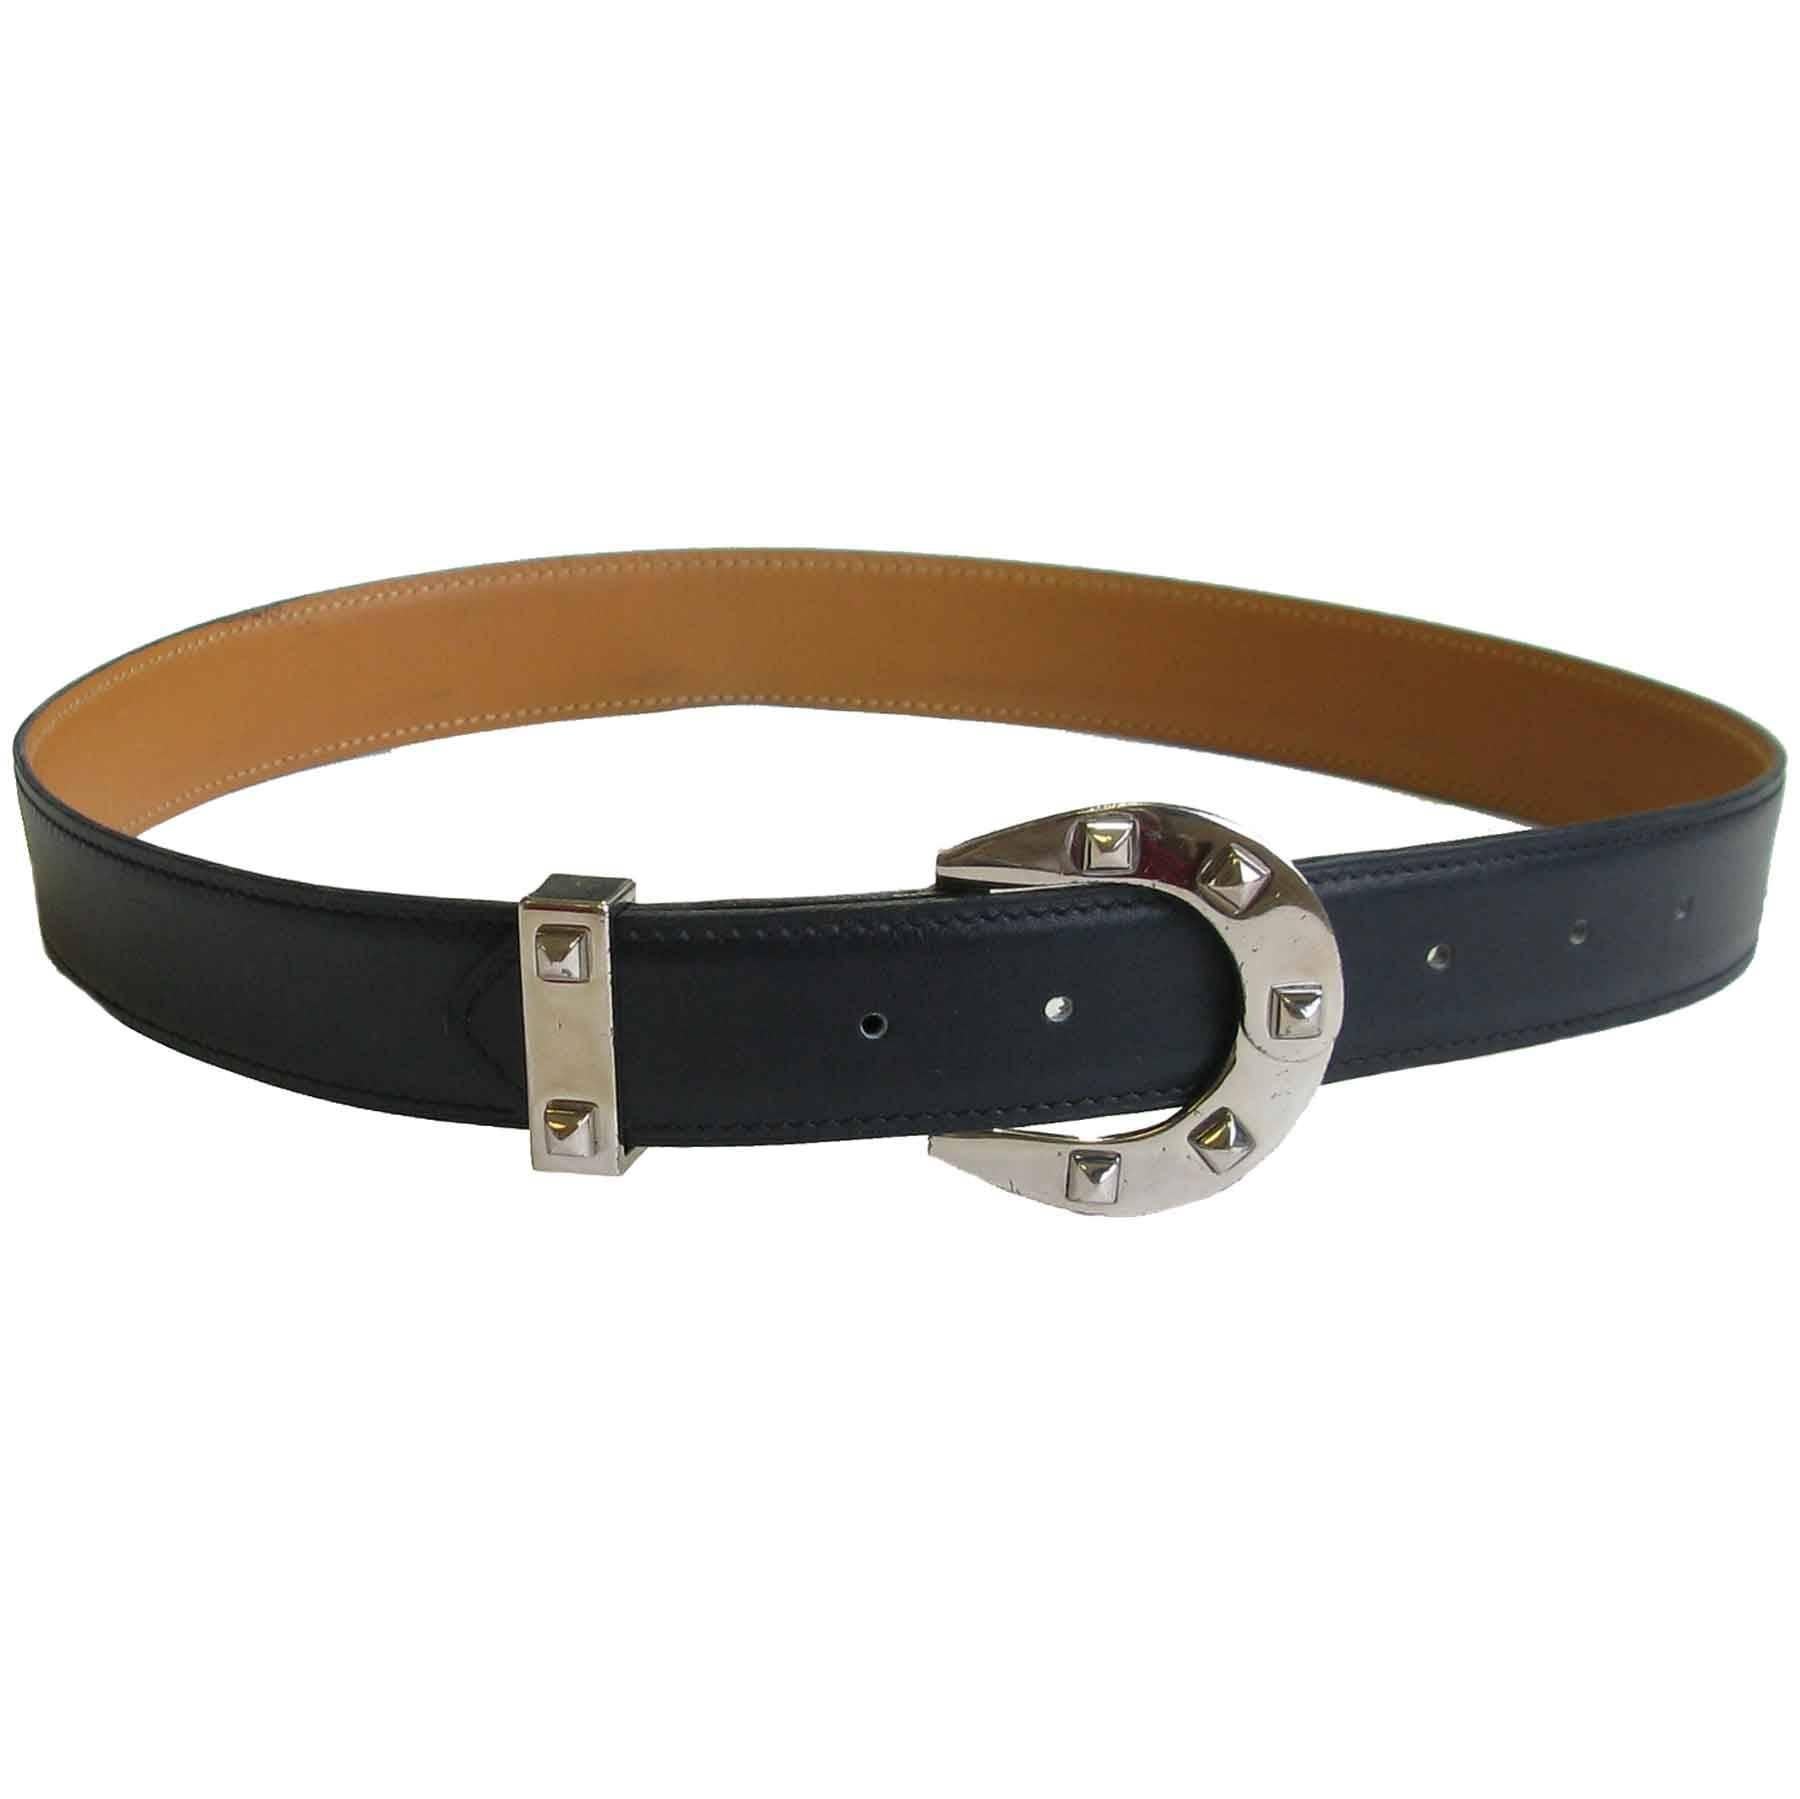 Hermes leather belt in navy blue leather and a horseshoe buckle studded in palladium silver.
Size 72, letter C in a square (year 1999). Made in France.

Dimensions: width: 2,8 cm, total length (leather + buckle): 88 cm, shortest: 69,5 cm, in the